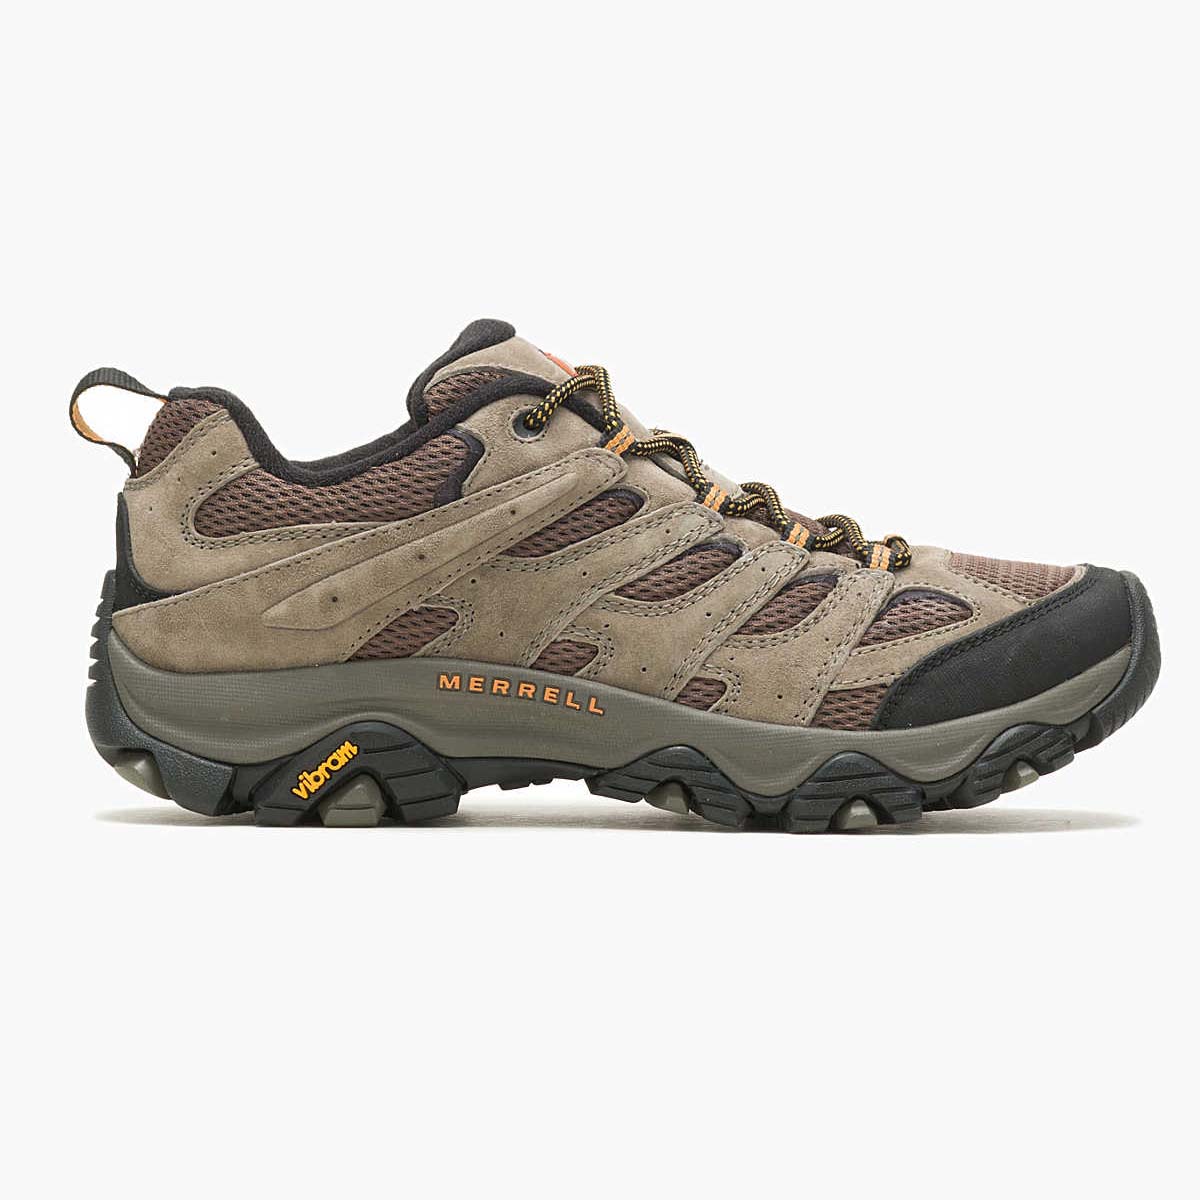 Moab 3 Hiking Shoes for men in light brown